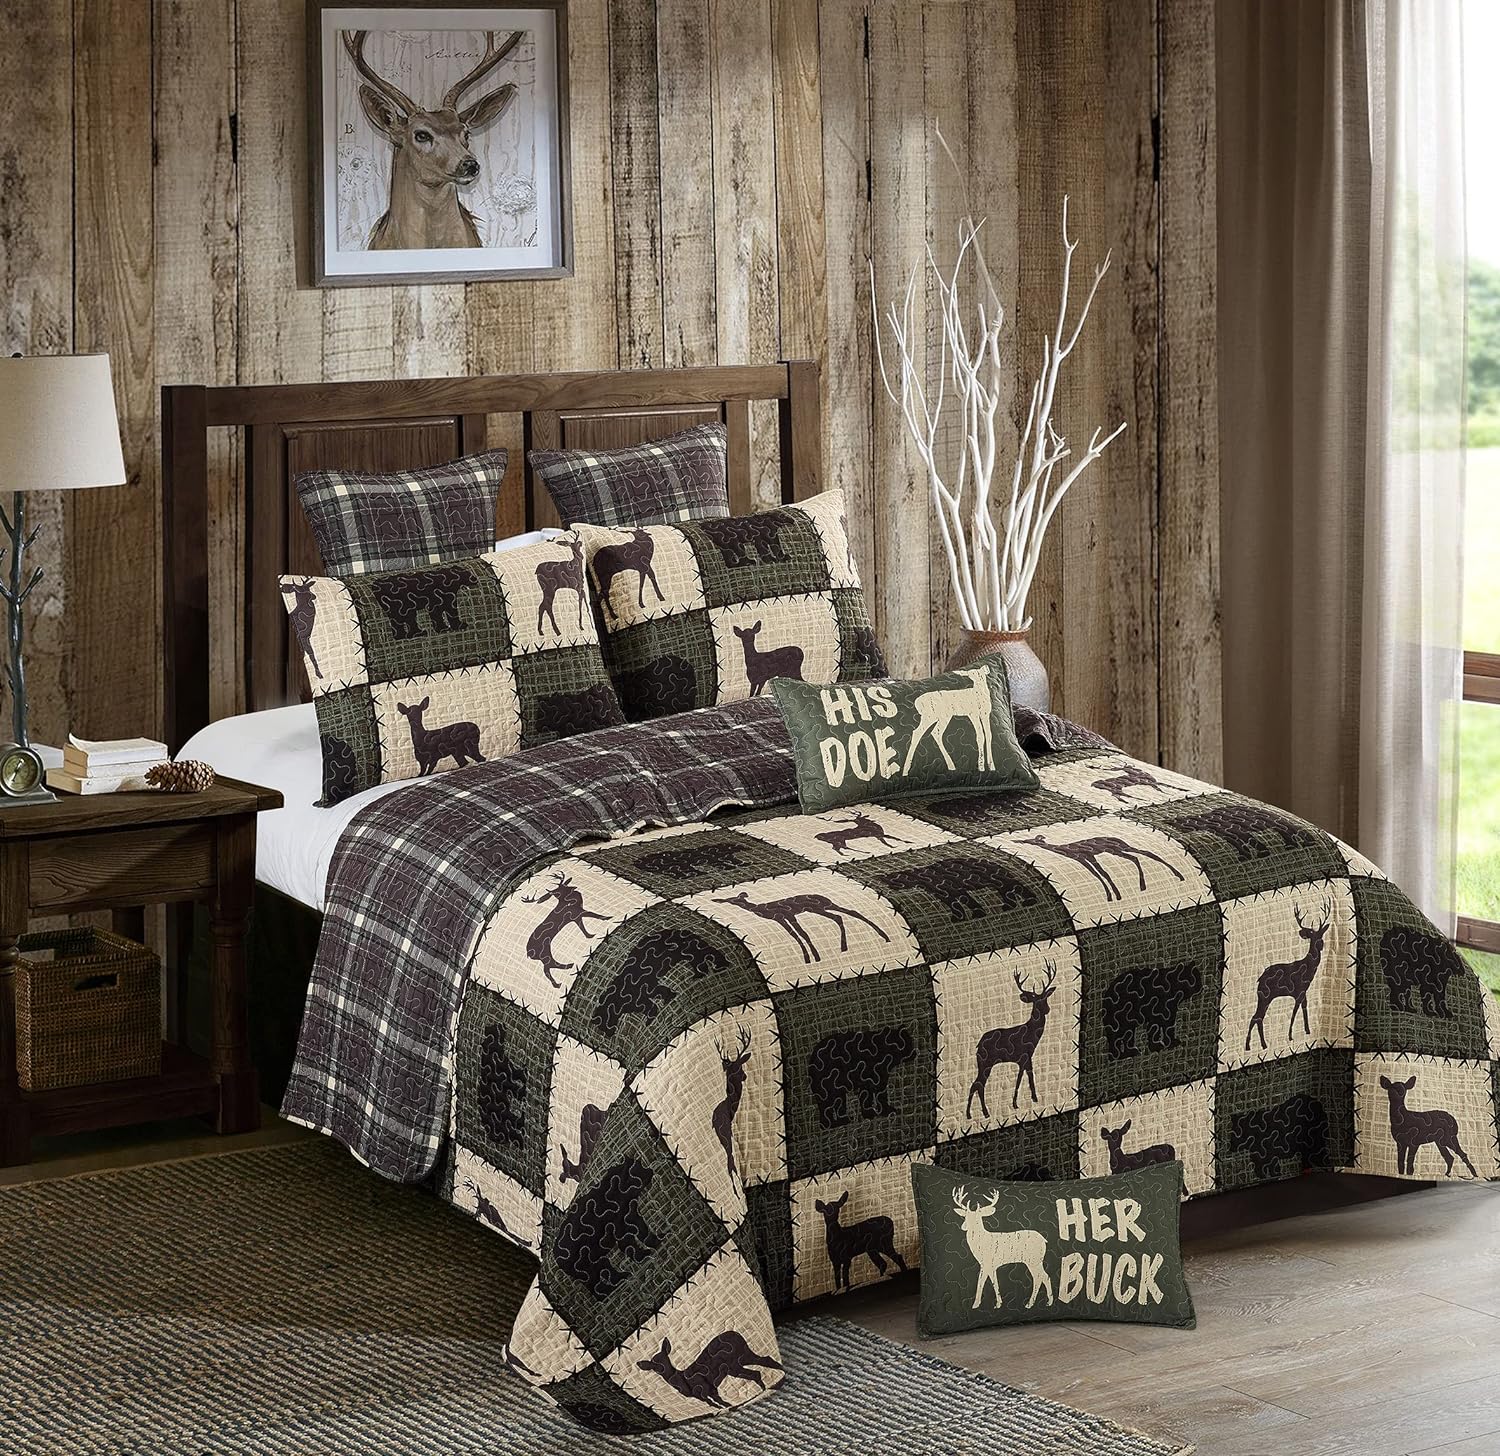 Virah Bella 3 Piece King Cabin Quilt Bedding Set - Stitched Forest - Verdant - Rustic Country Reversible Patchwork Comforter Set with Decorative Pillow Shams